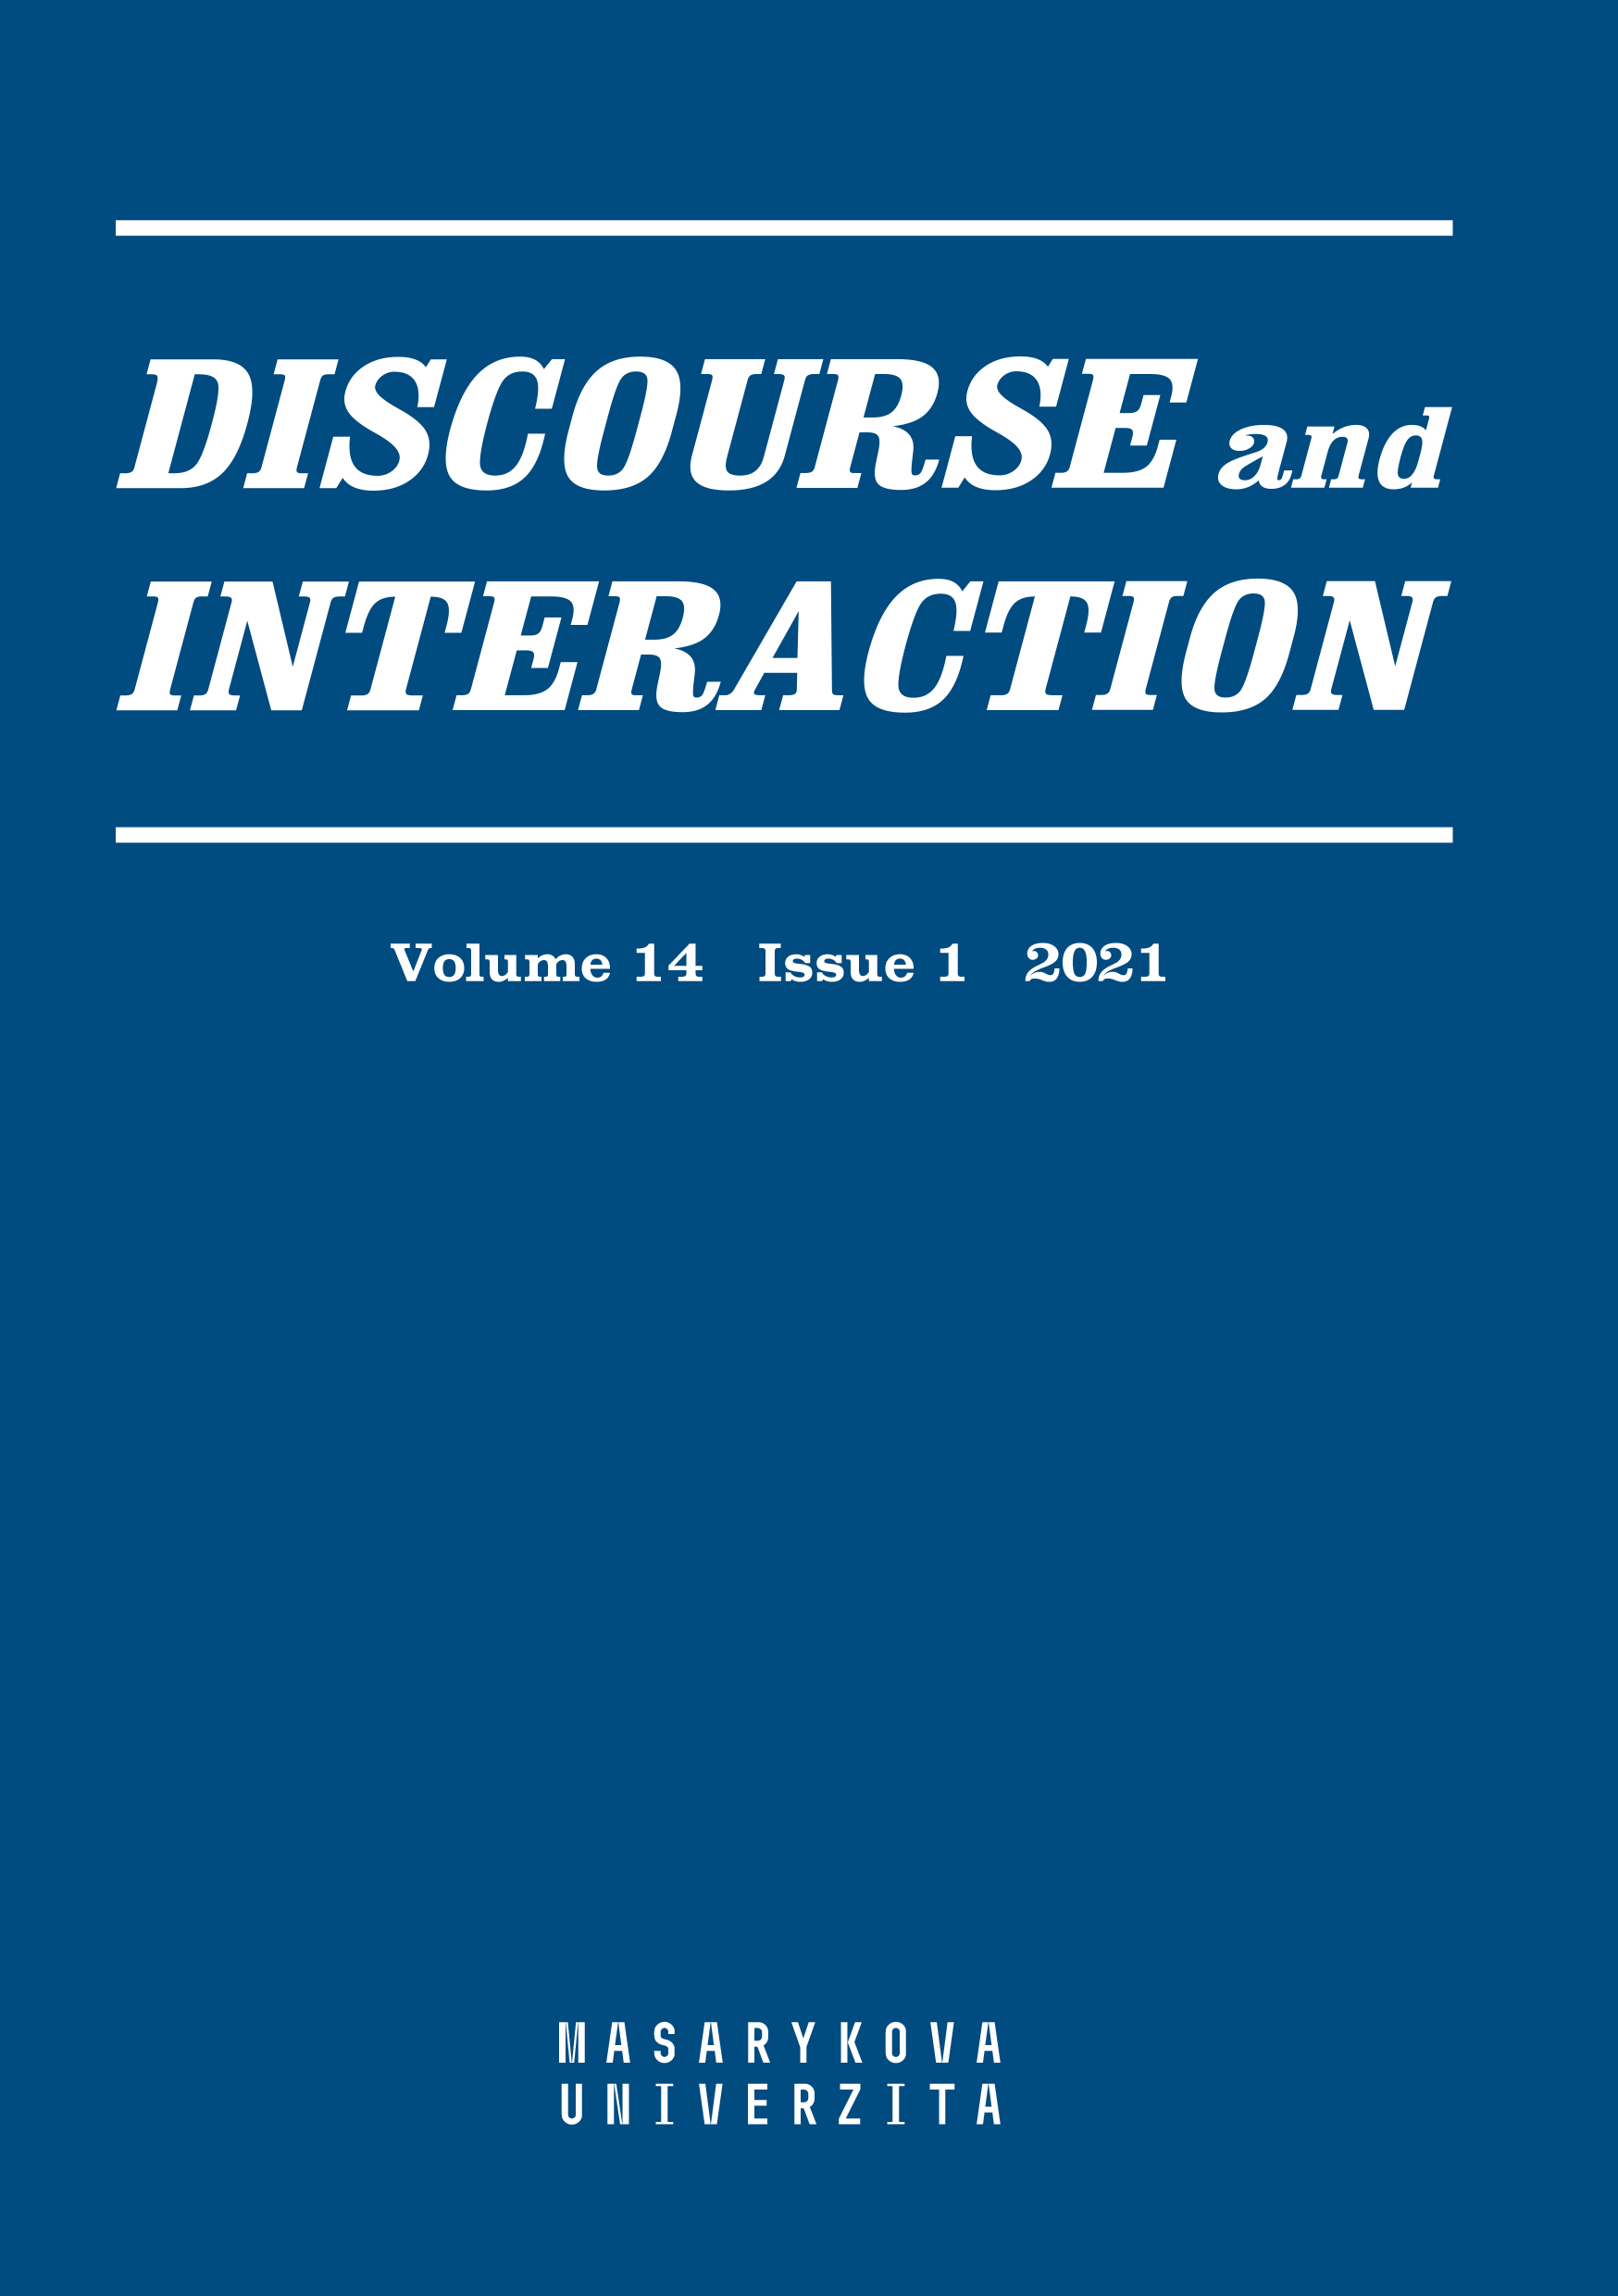 Contrastive interlanguage analysis of evidentiality in Ph.D. dissertations Cover Image